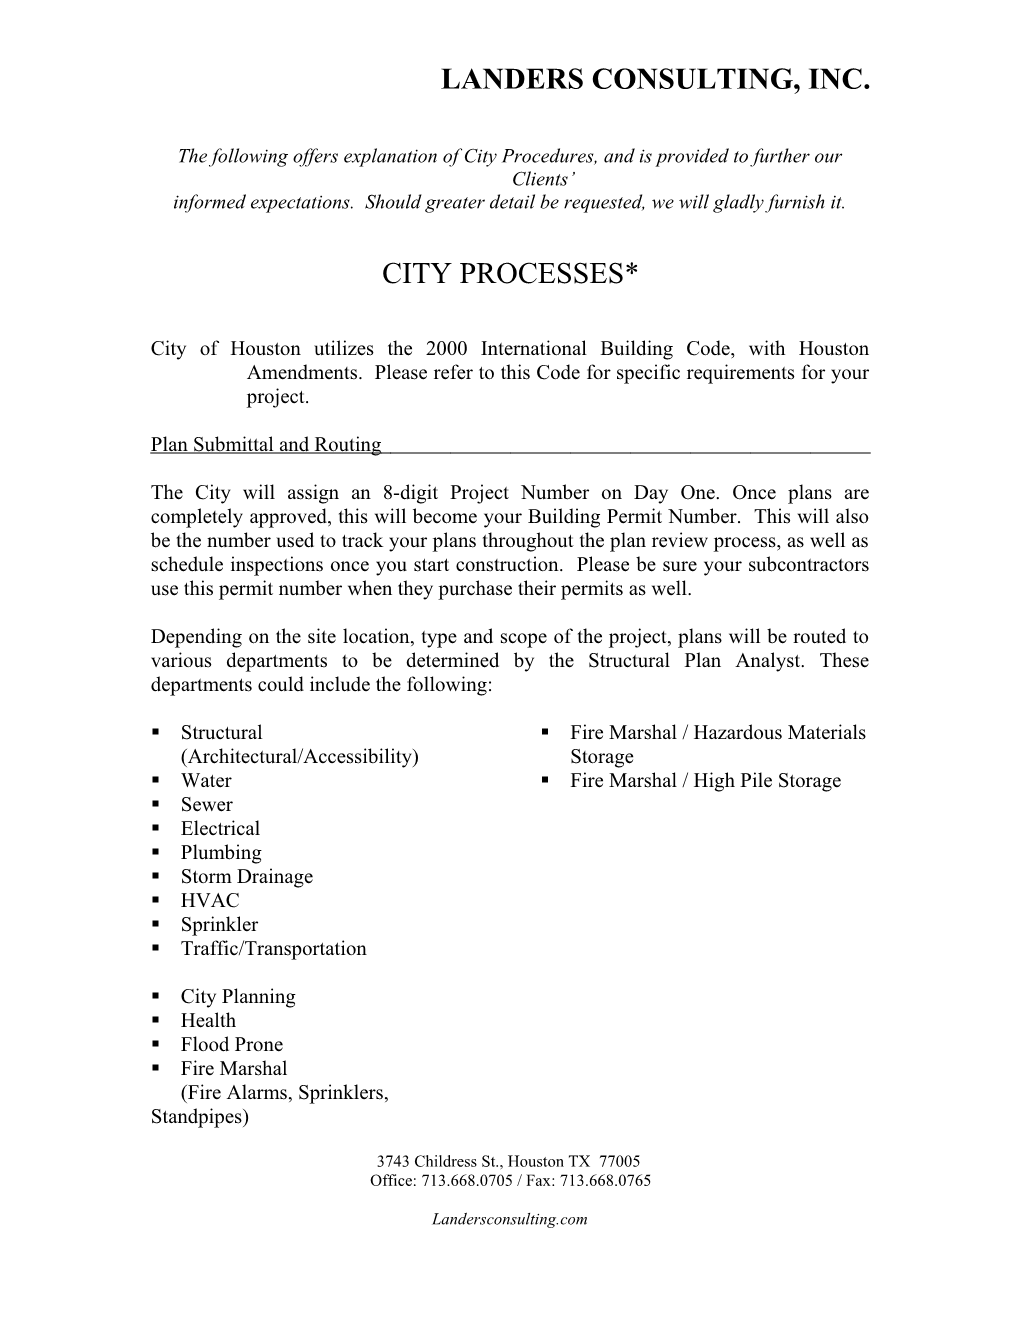 The Following Offers Explanation of City Procedures, and Is Provided to Further Our Clients